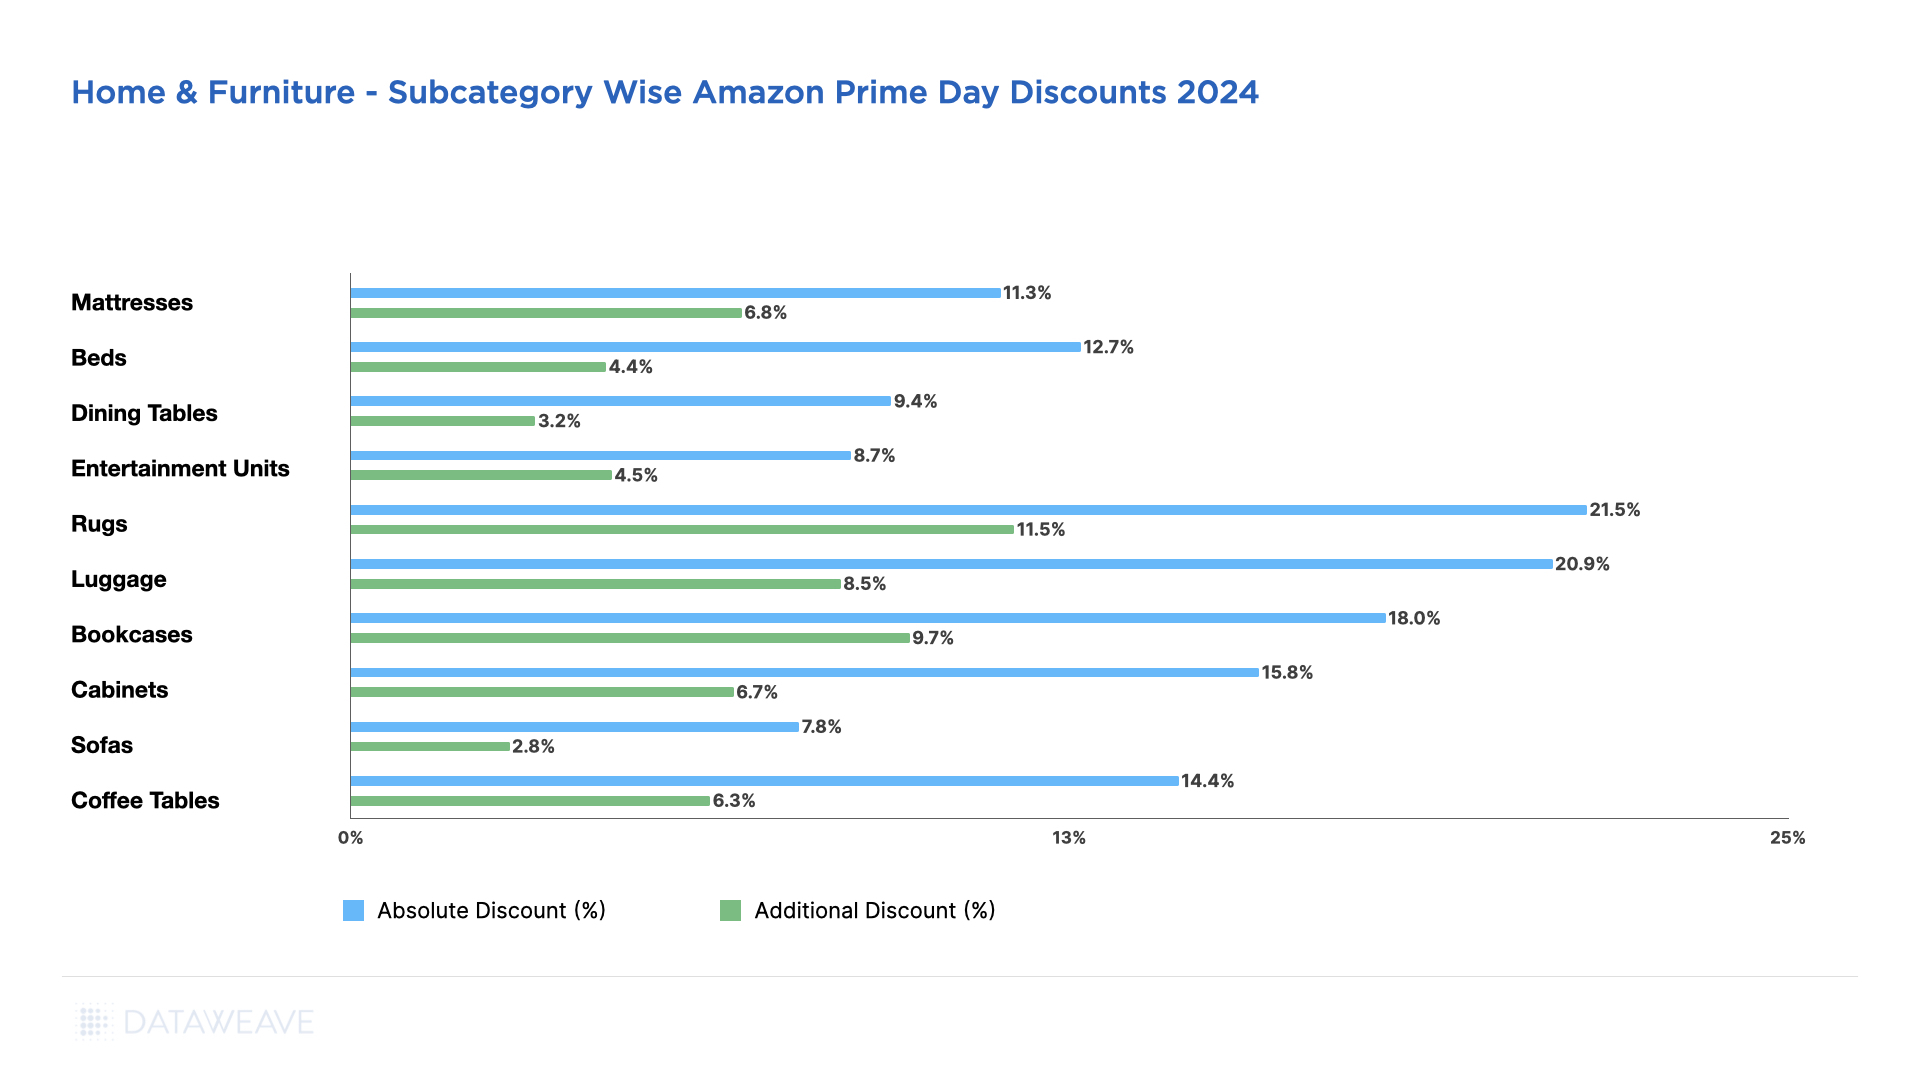 Discounts offered on Home & Furniture Subcategories During Amazon Prime Day USA 2024